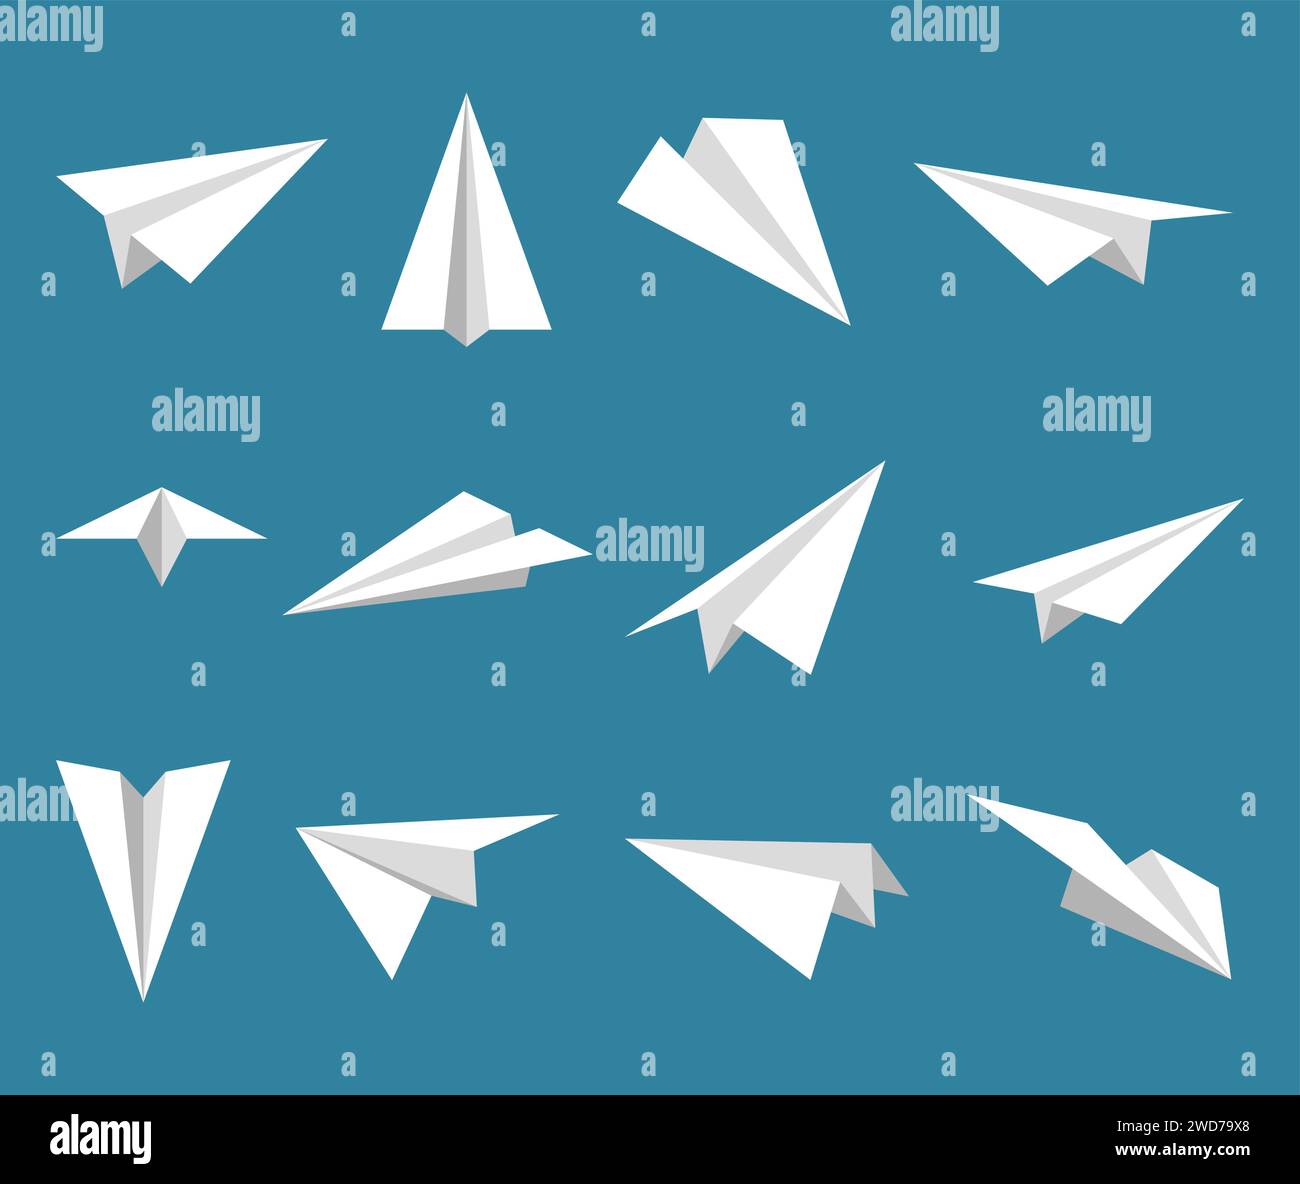 Set simple paper planes icon. White origami paper airplanes from different angles. Handmade aircraft on blue background. Vector illustration. Stock Vector